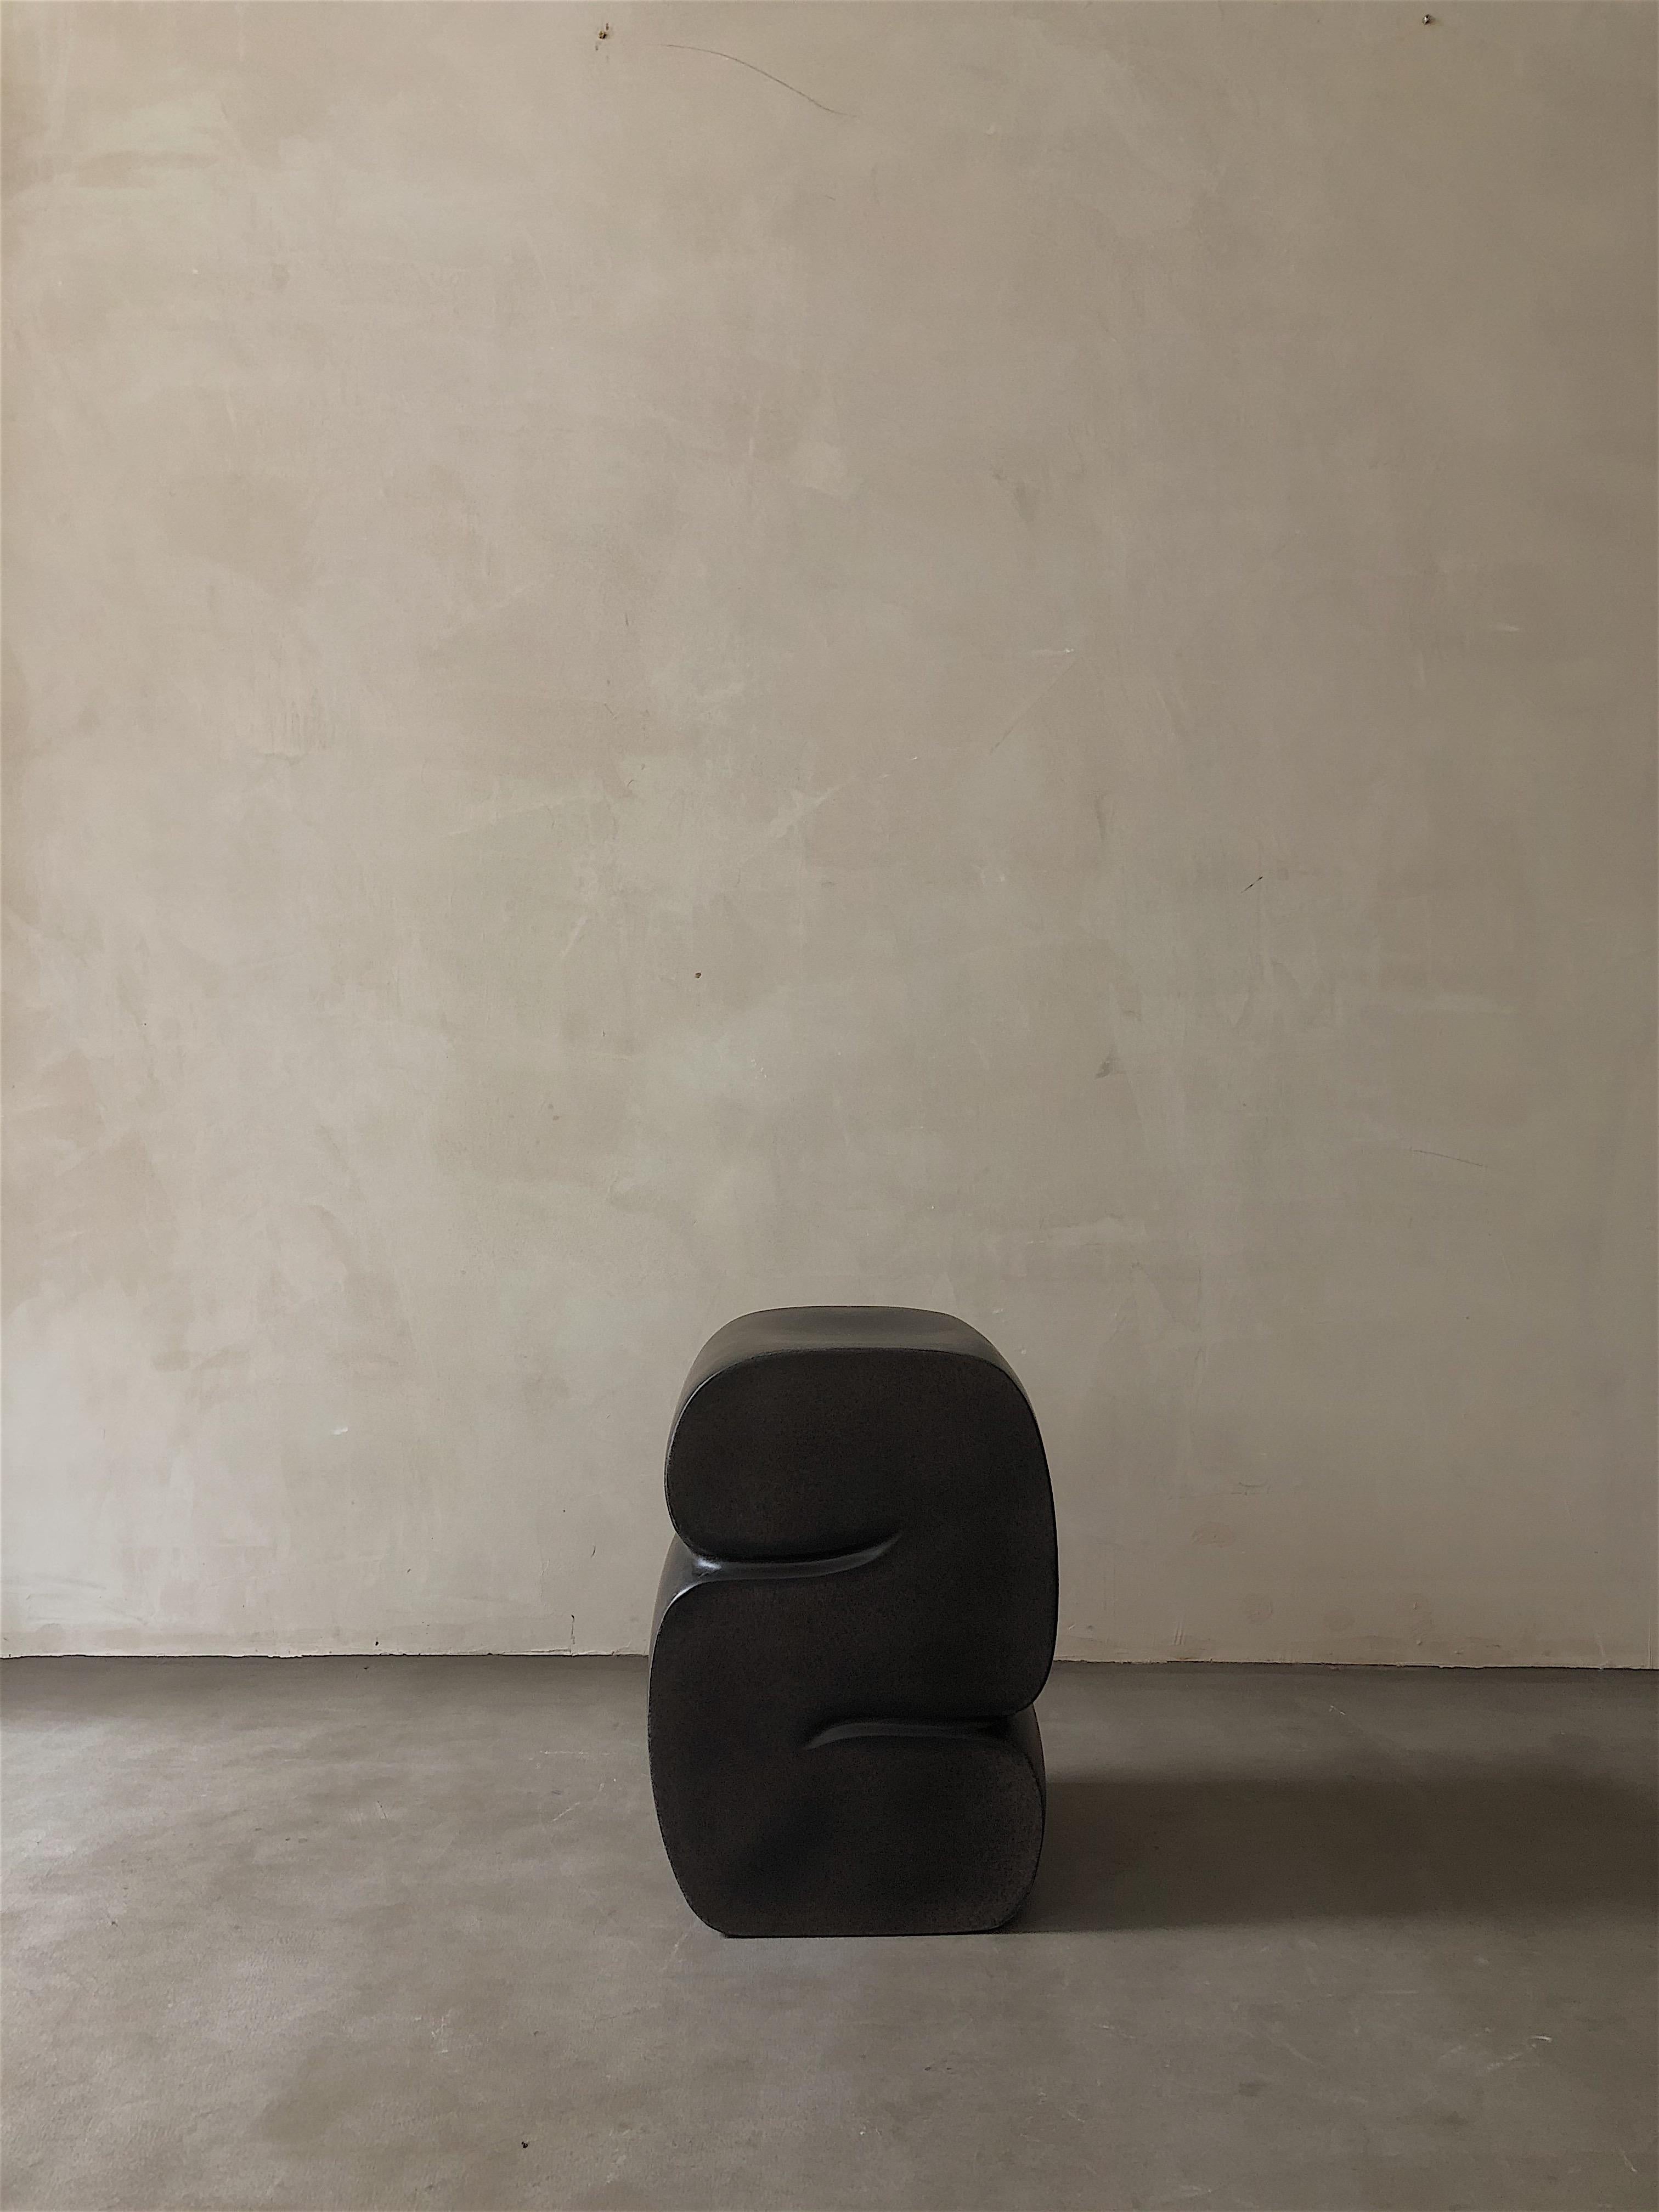 Coffee stool by Karstudio.
Materials: FRP.
Dimensions: 32 x 32 x 45 cm.

It shapes in a curl-up position, casual meanwhile restrained. The side designed as a cross-section of the furniture to present the curve and texture.

Kar- is the root of